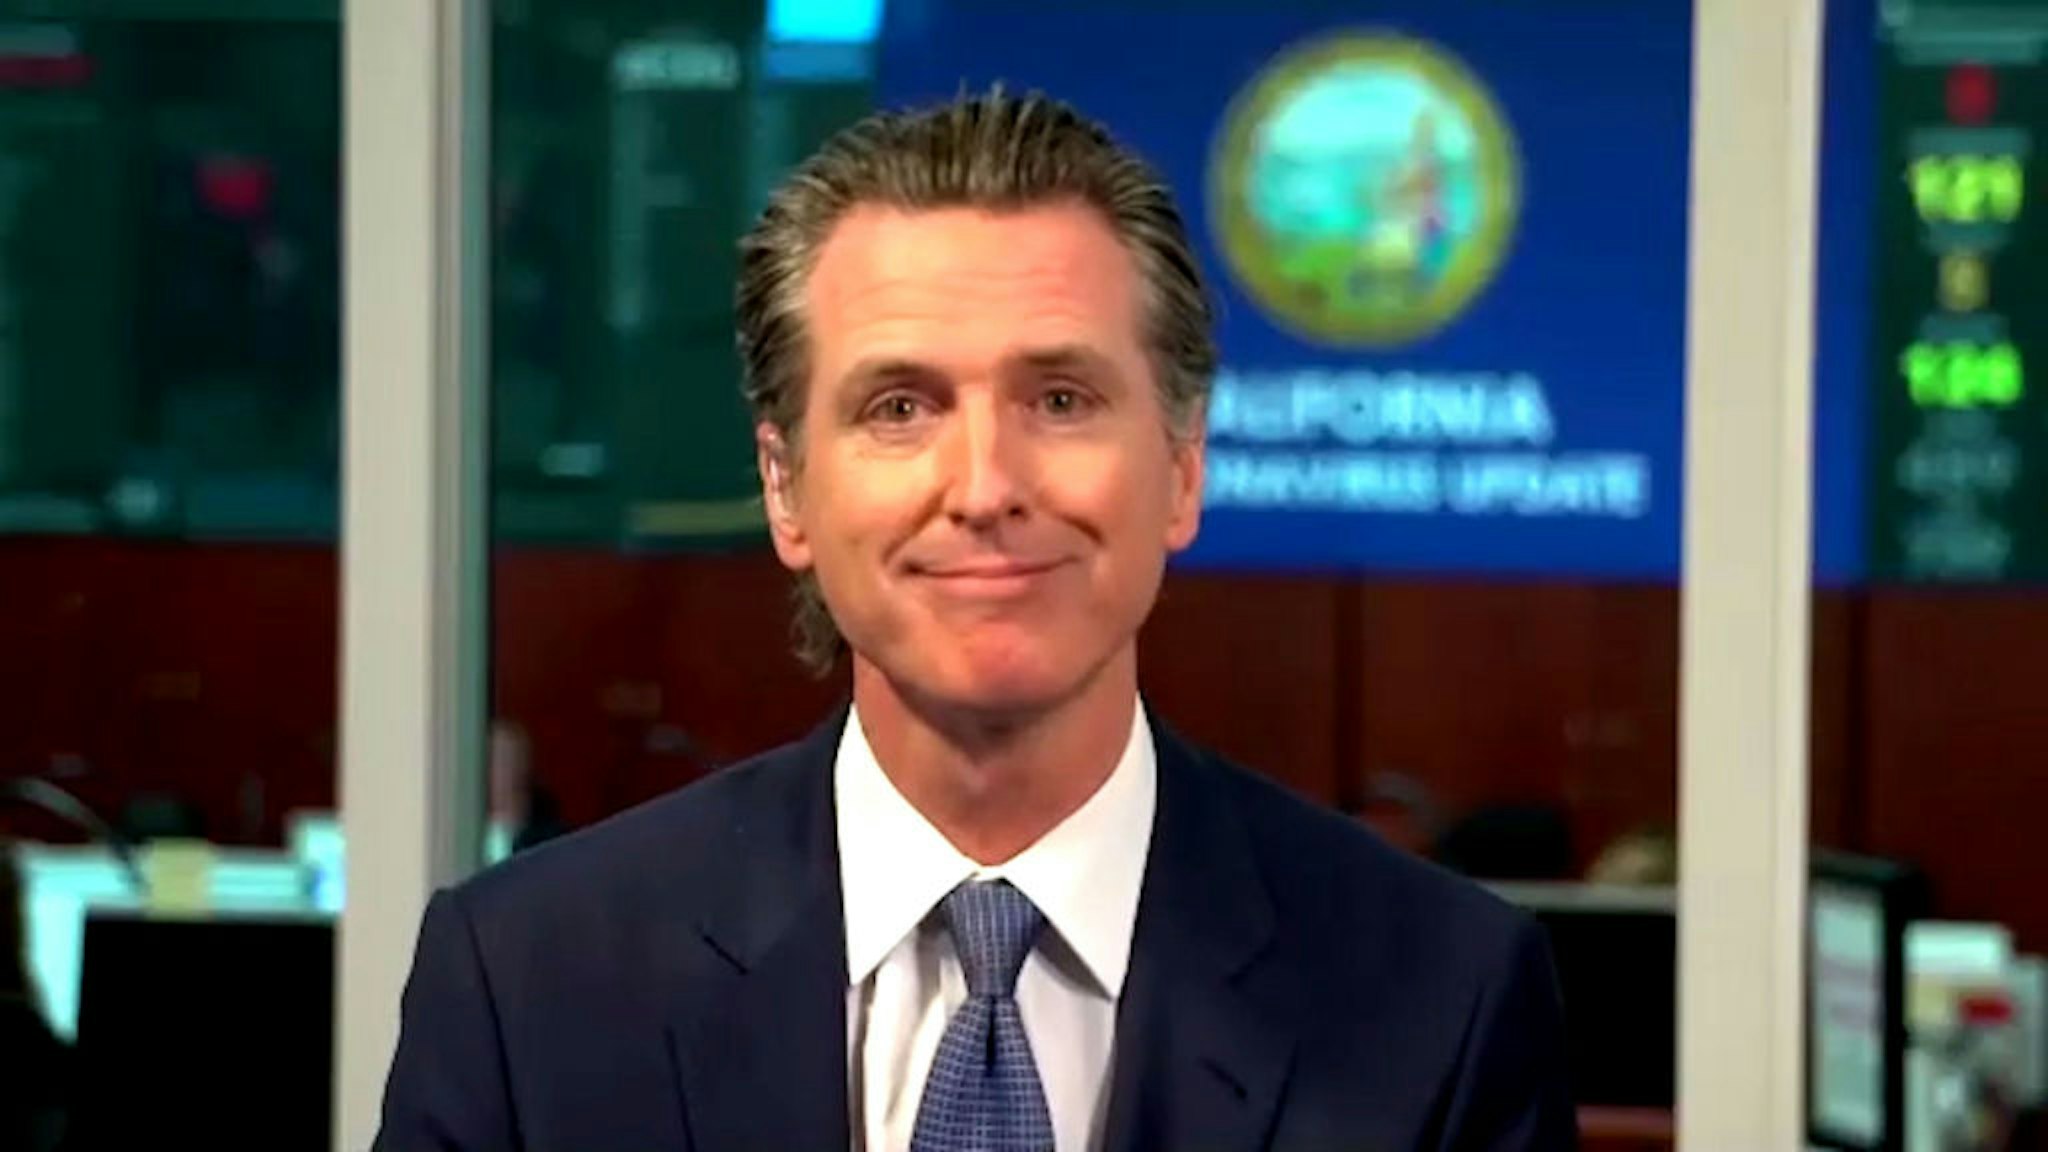 Pictured in this screen grab: Gov. Gavin Newsom during an interview on April 30, 2020